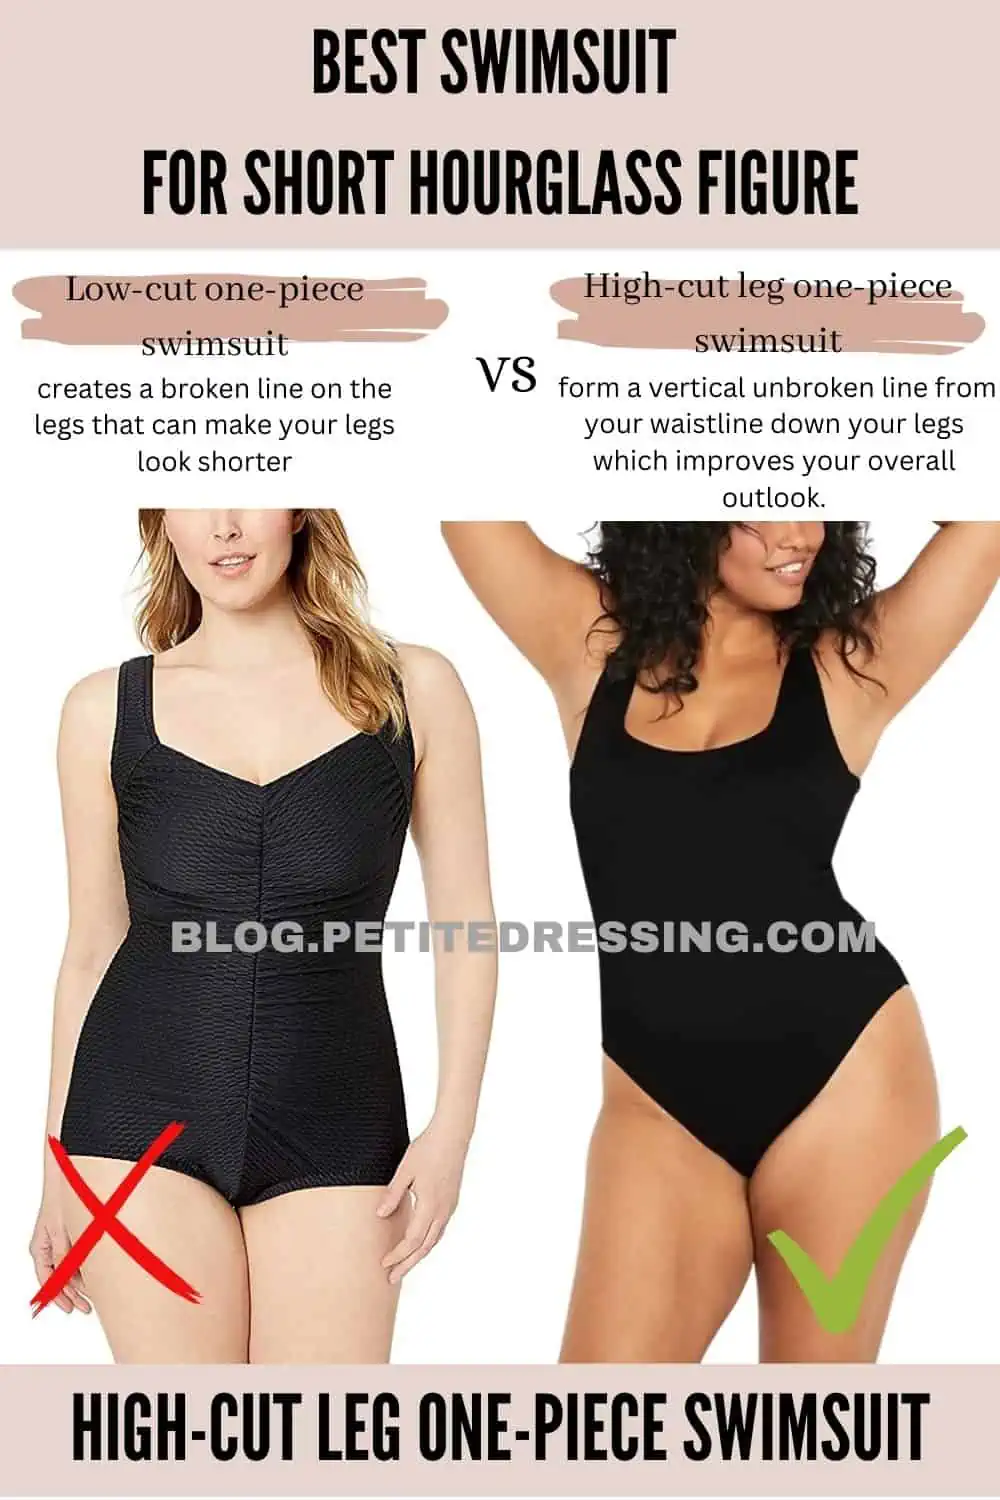 25 Best Swimsuit for Hourglass Figure